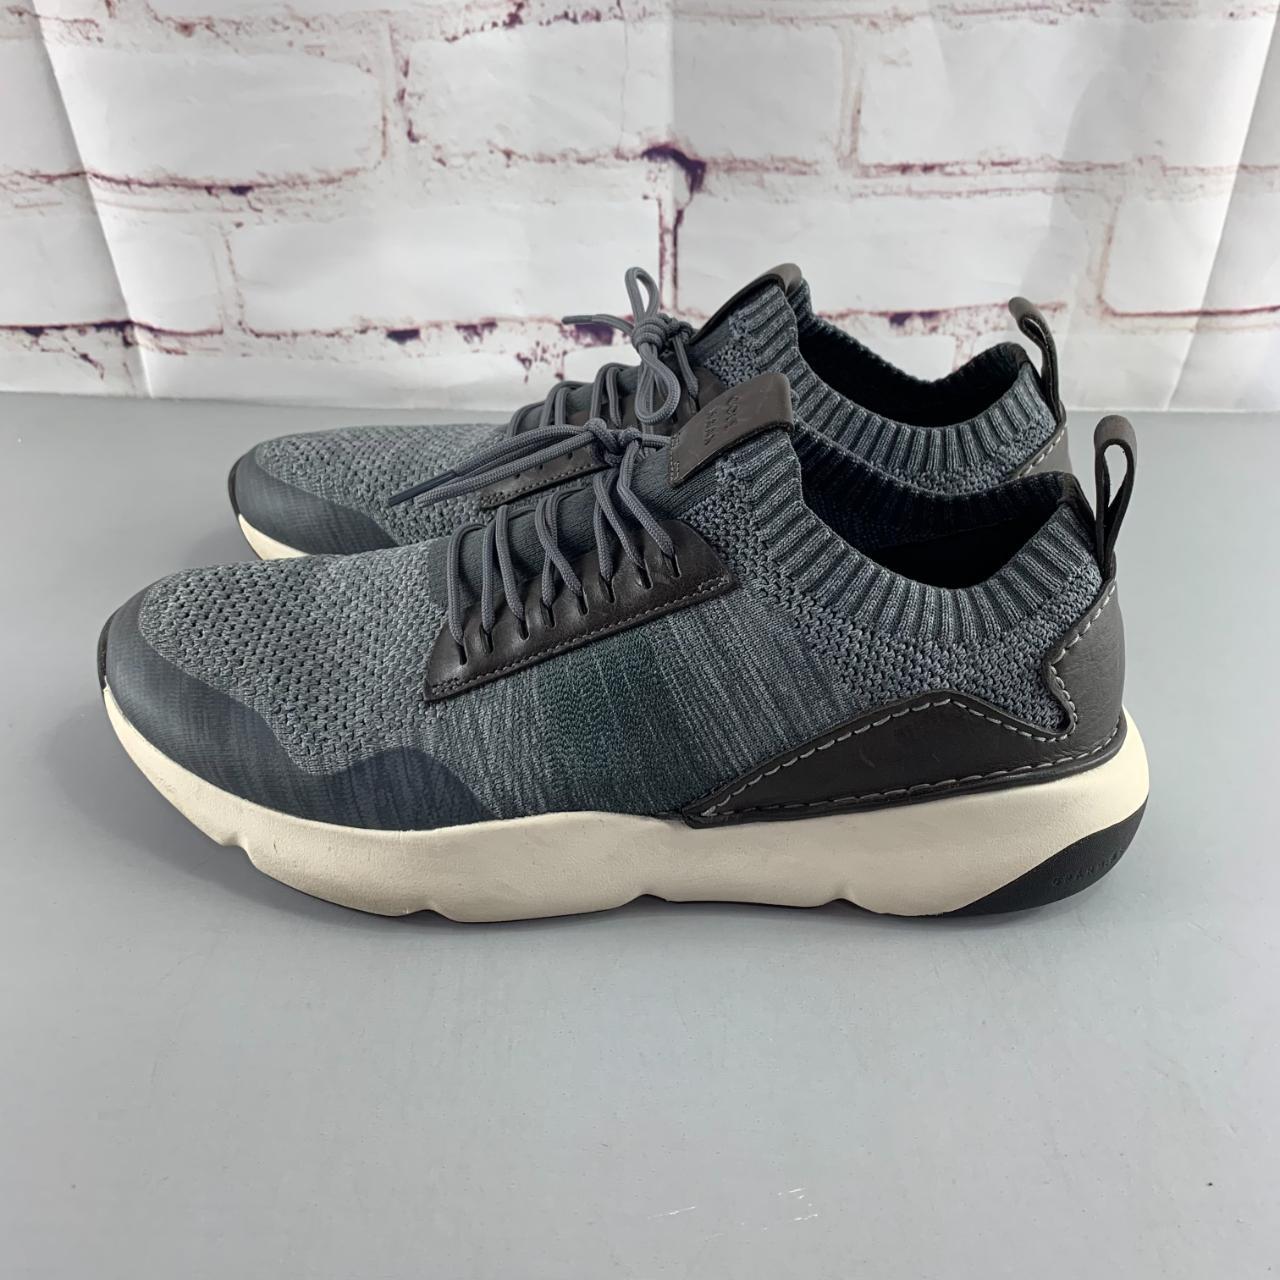 Cole Haan 3.Zero Grand Motion All Day Trainers Men's... - Depop